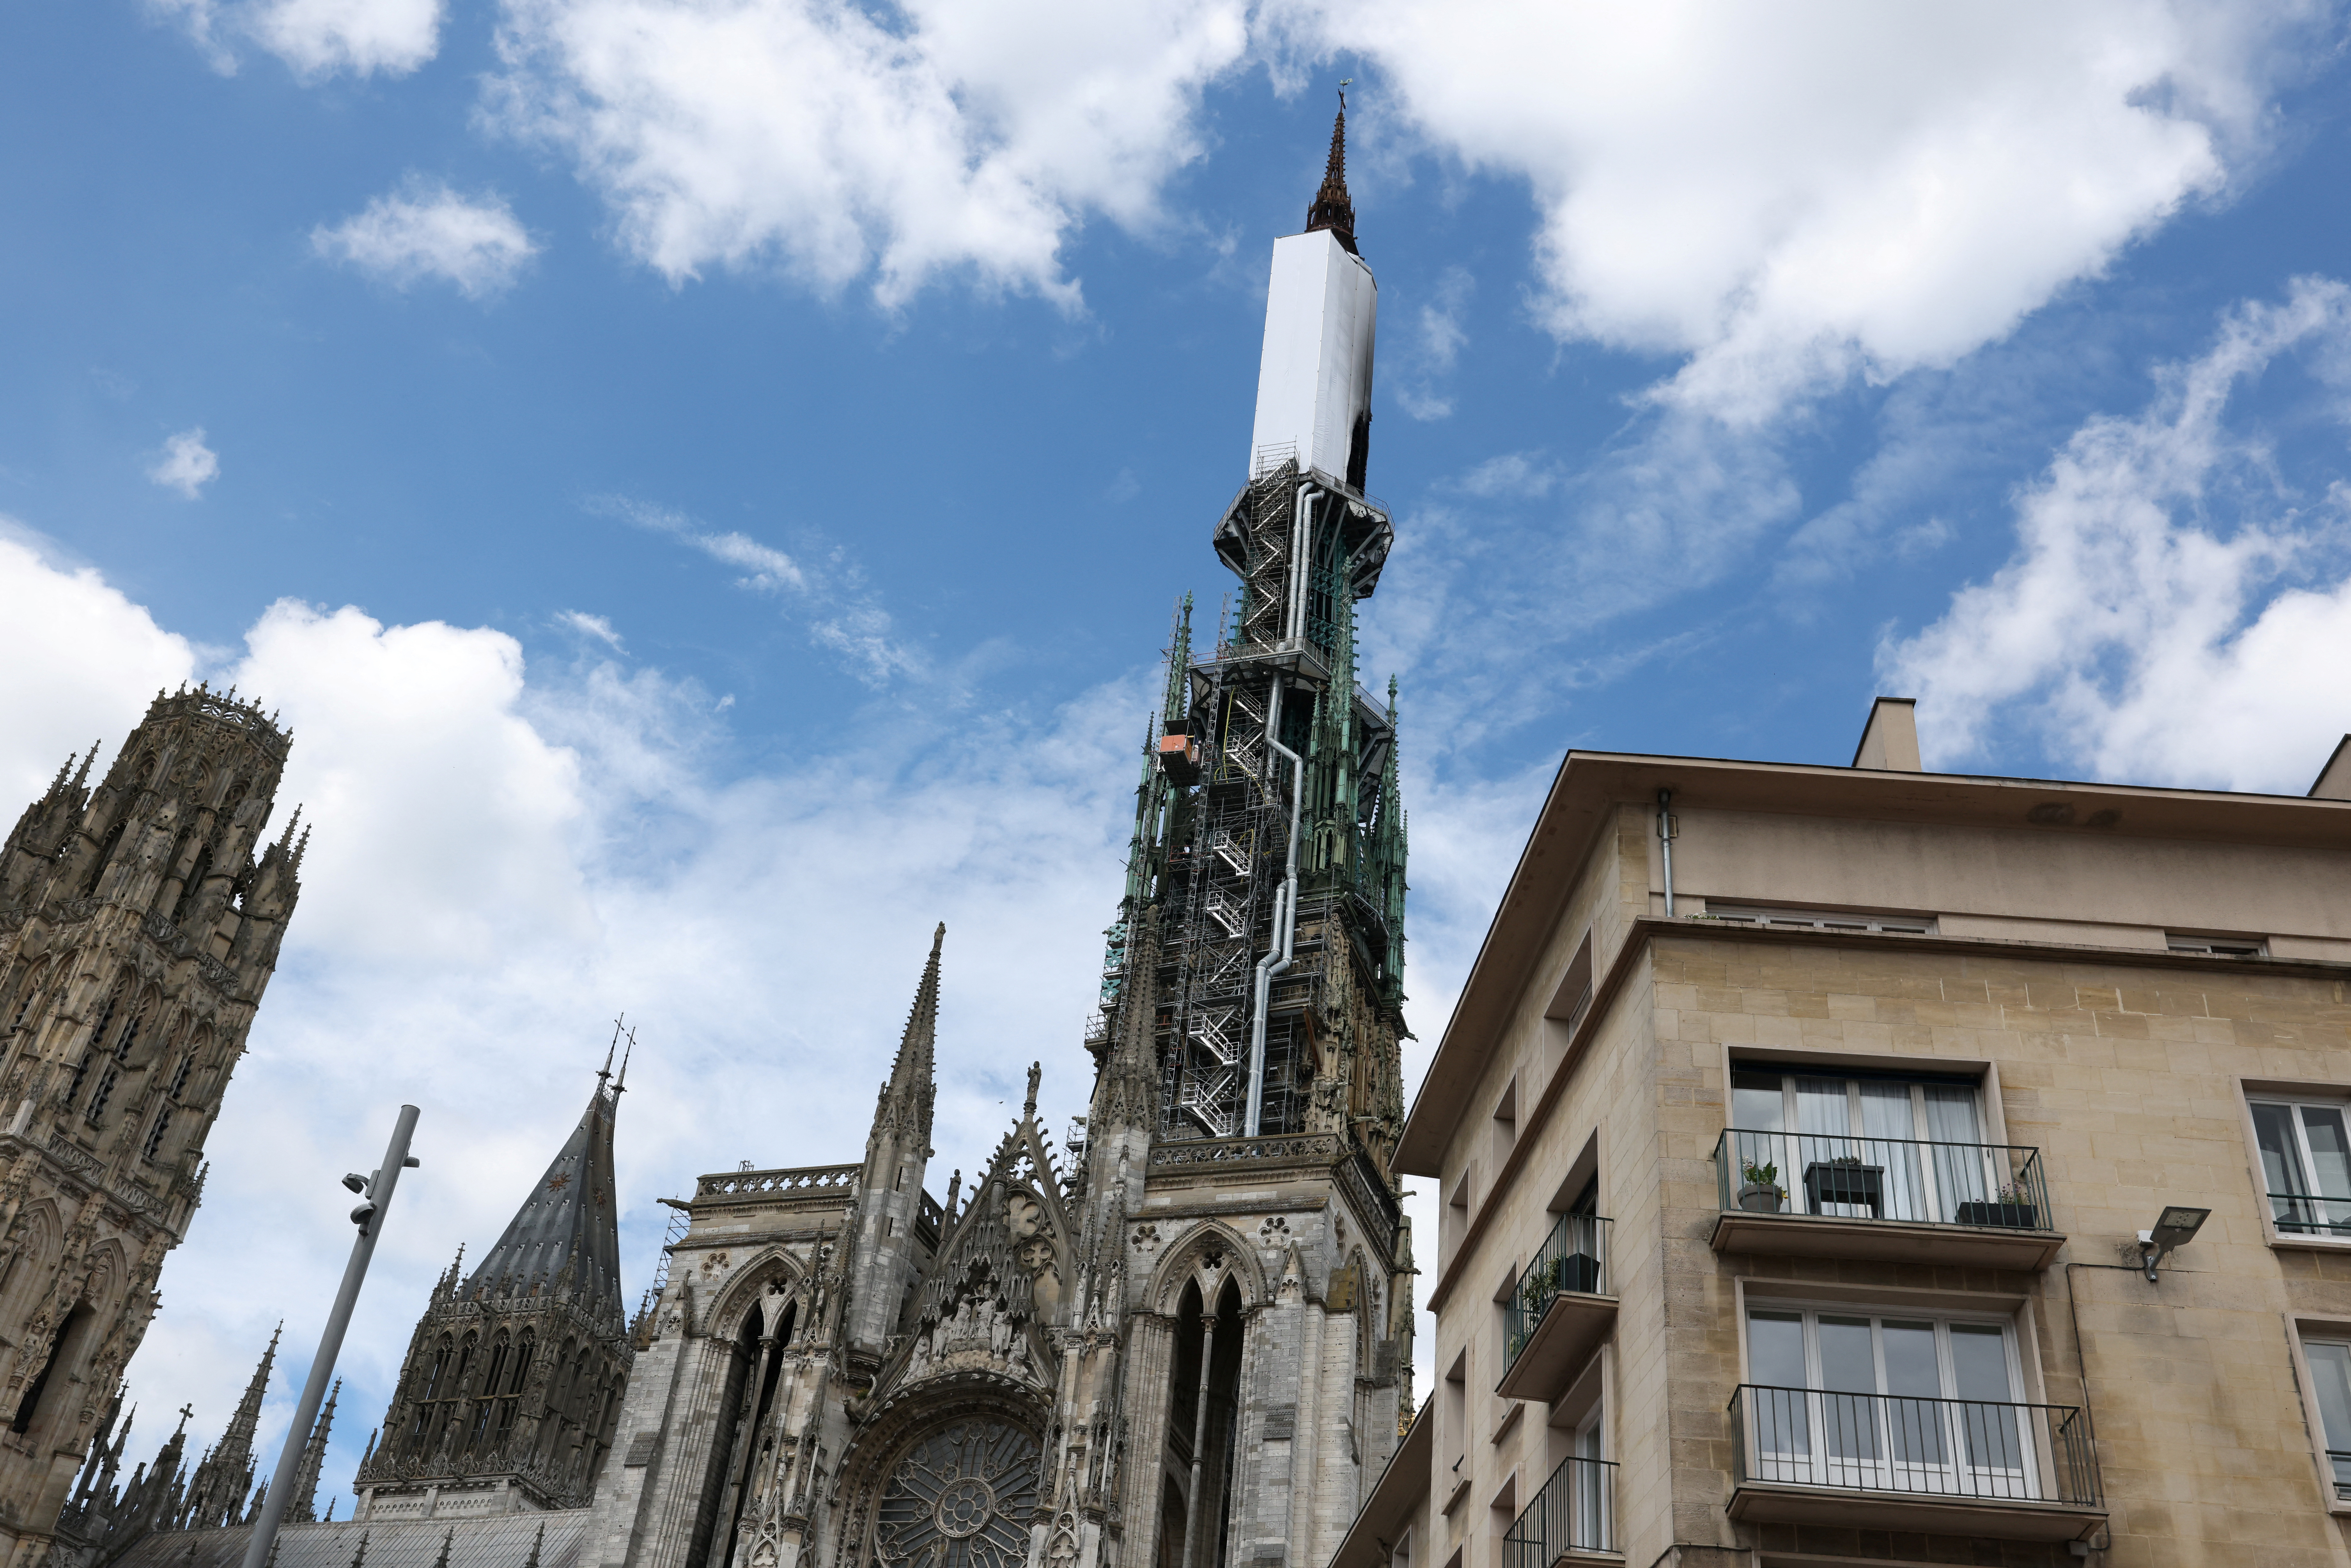 The spire of Rouen's cathedral has caught fire